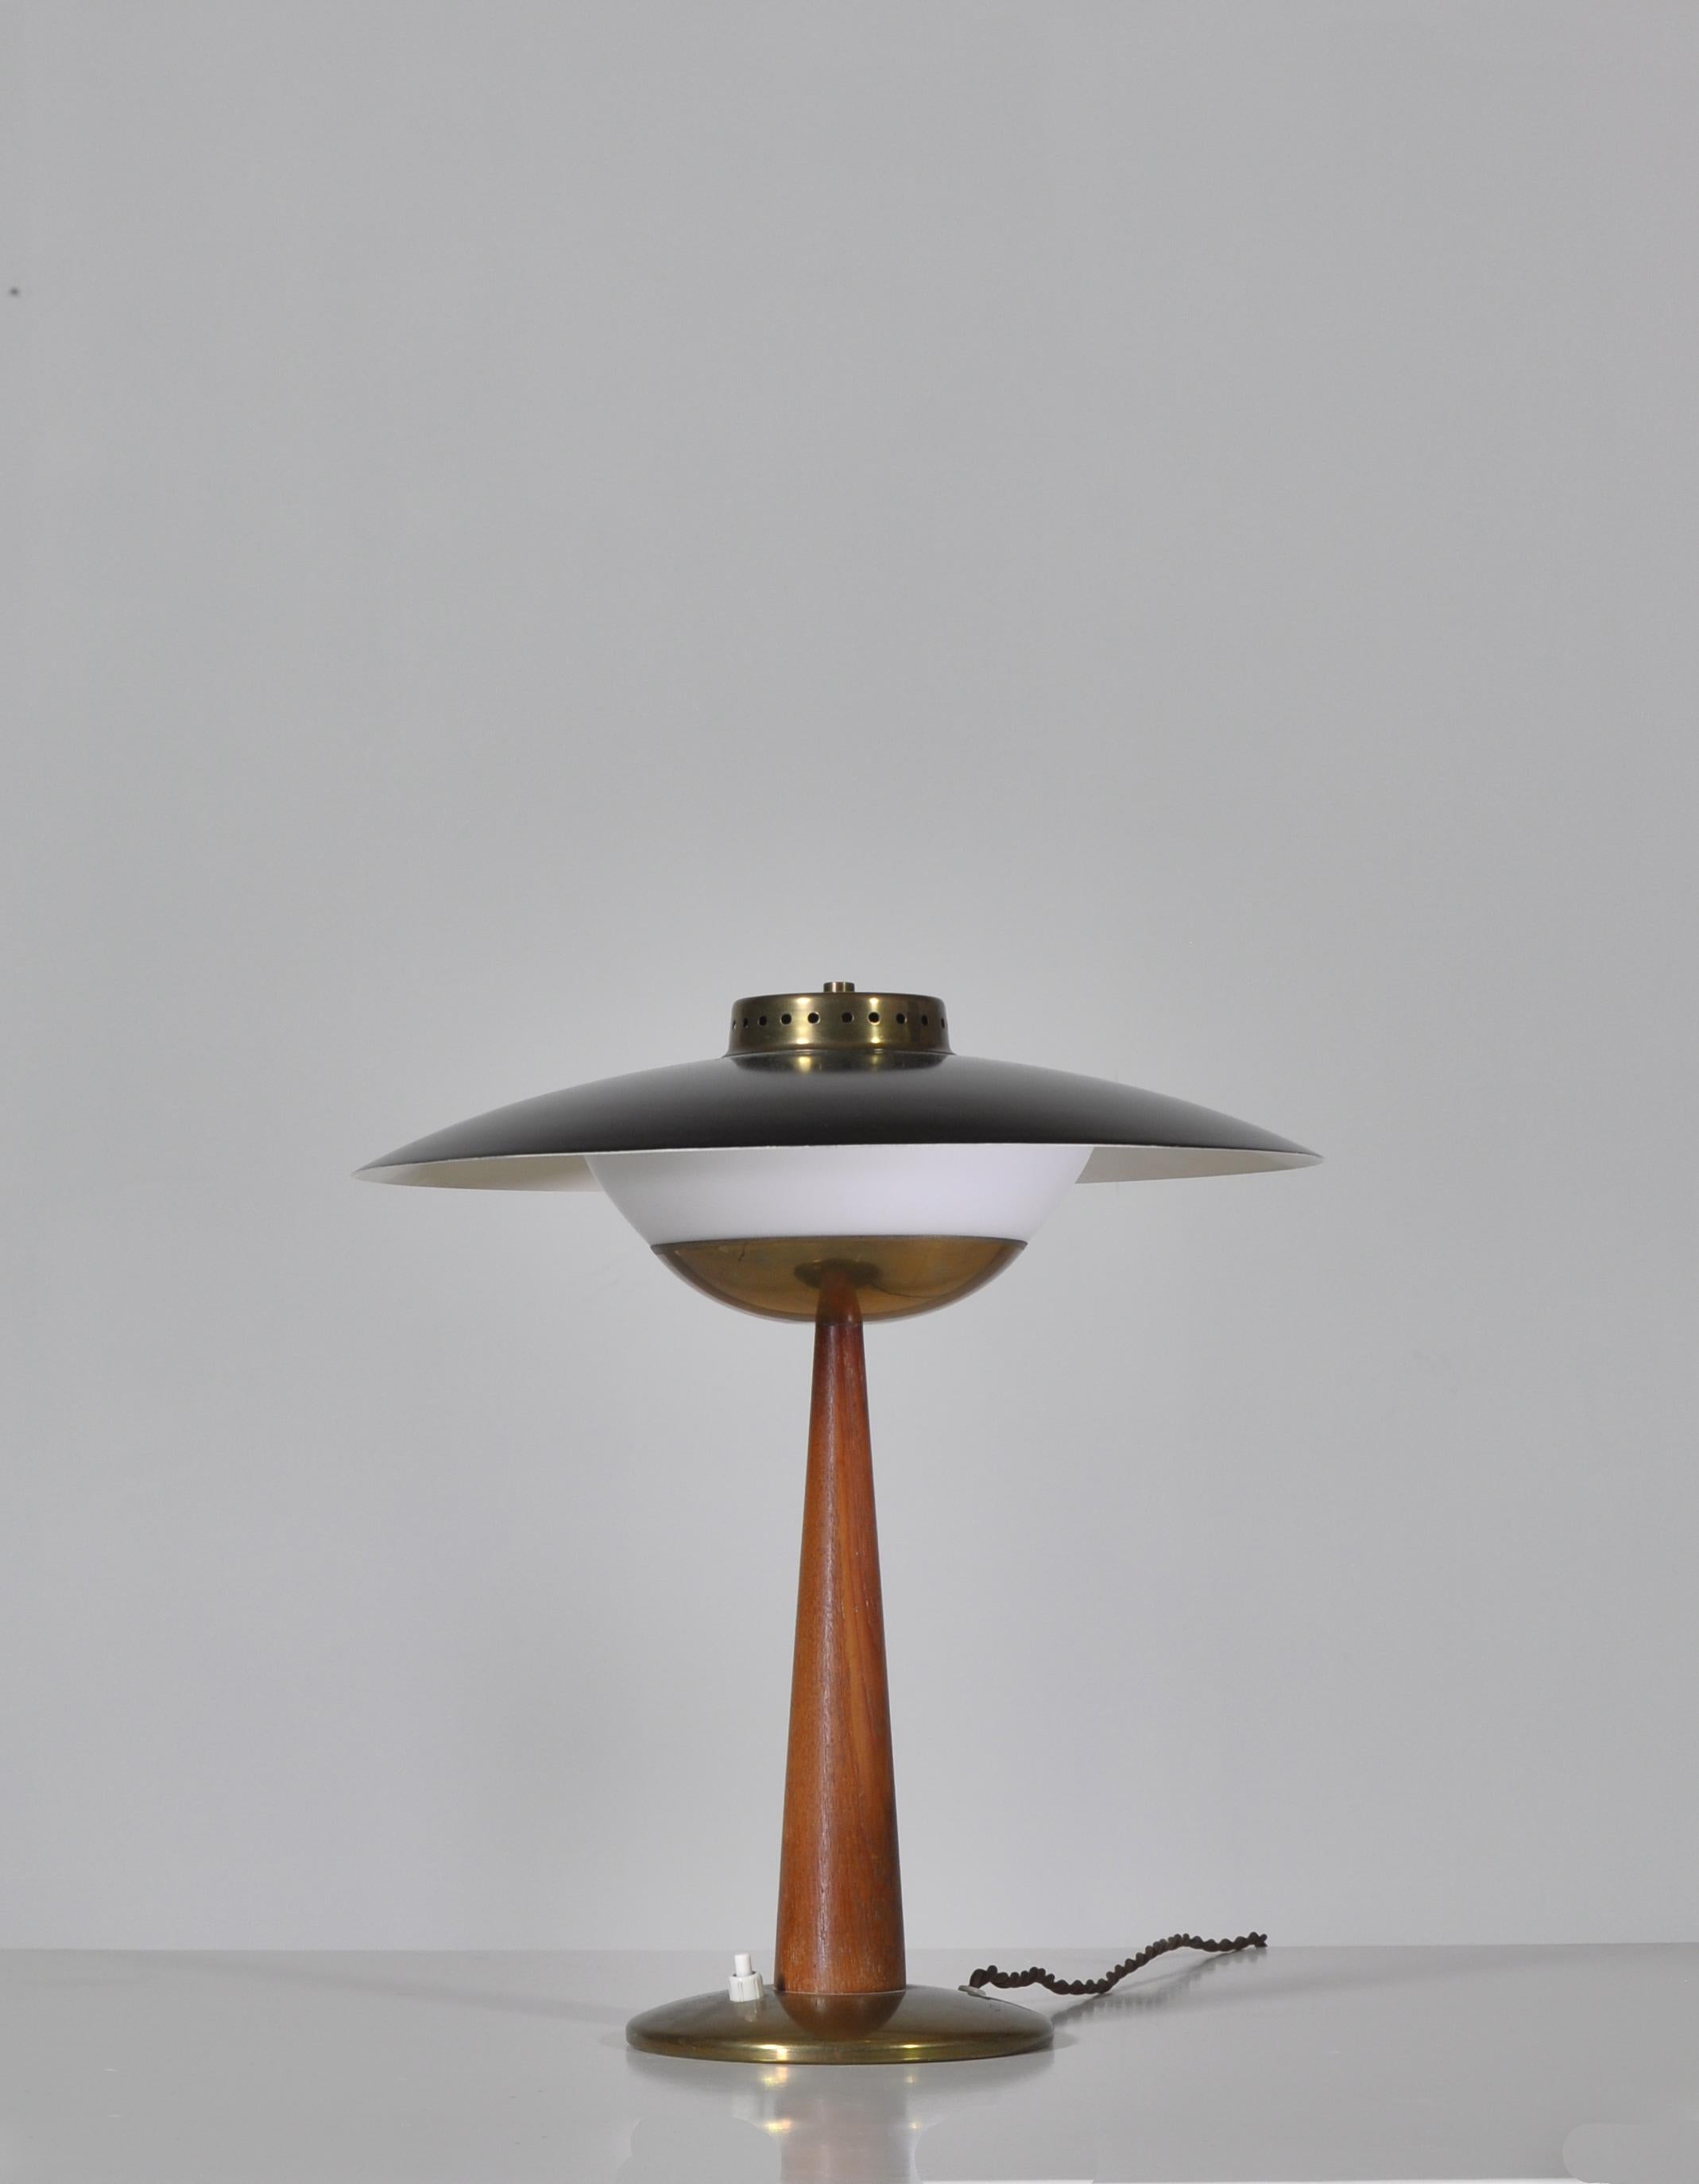 Amazing vintage table lamp made in Scandinavia in the 1950s in the style of Hans Bergström, Svend Aage Holm Sørensen etc. The lamp is produced in high quality materials such as Bangkok teakwood, opal glass and solid brass. It features beautiful and